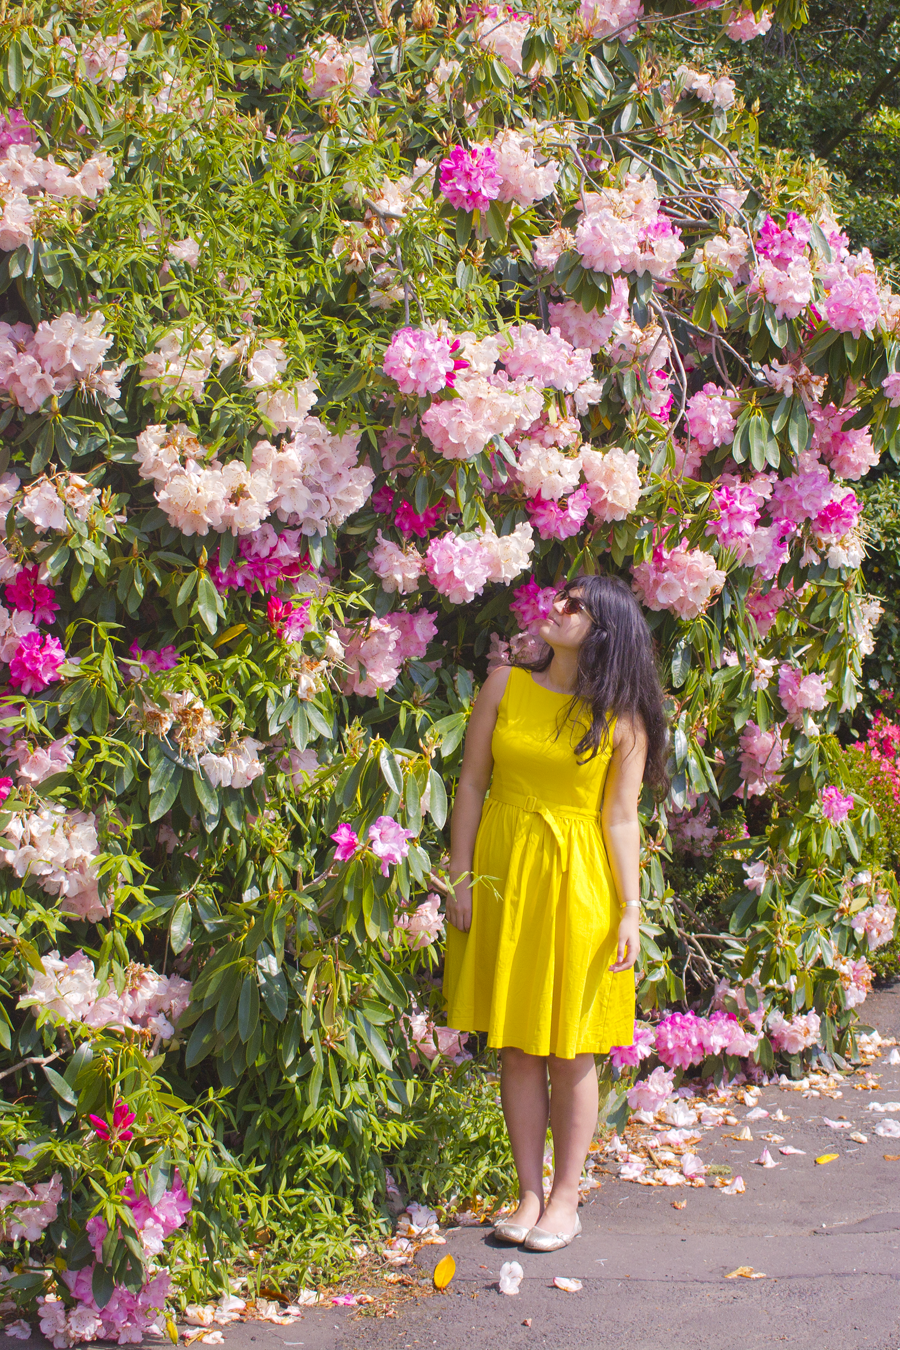 girl in yellow, yellow dress, girl holding yellow leaf, yellow leaf, rhodedendron, glasgow botanical garden, yellow fifites dress, pink flowers, pink and white flowers, floral, garden, flowers, flower, glasgow